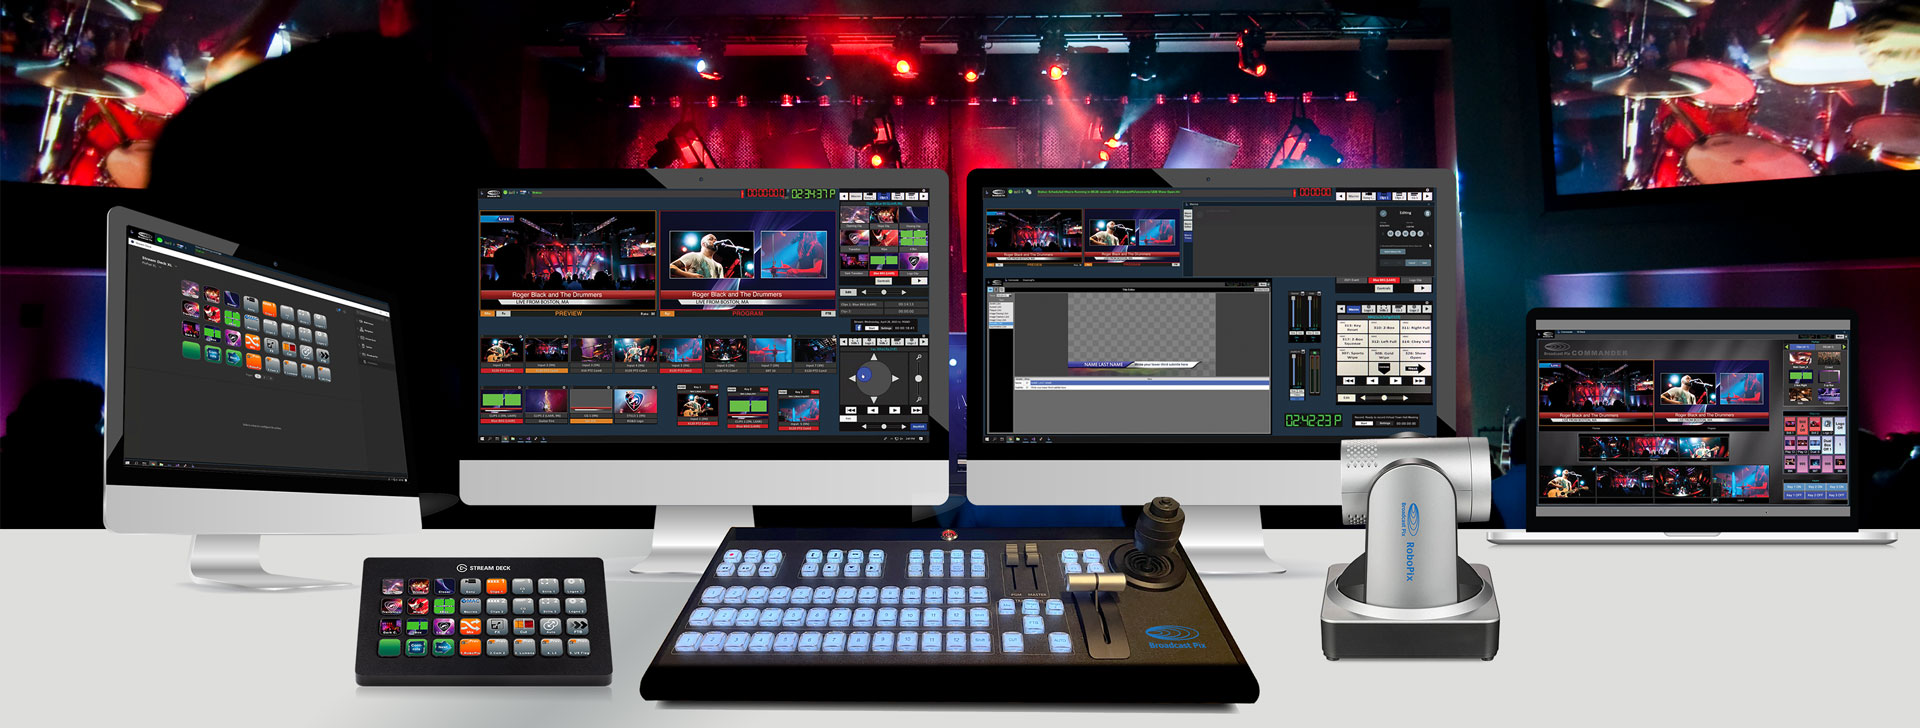 Broadcast Pix FX Hybrid Video Production and Live Streaming Systems